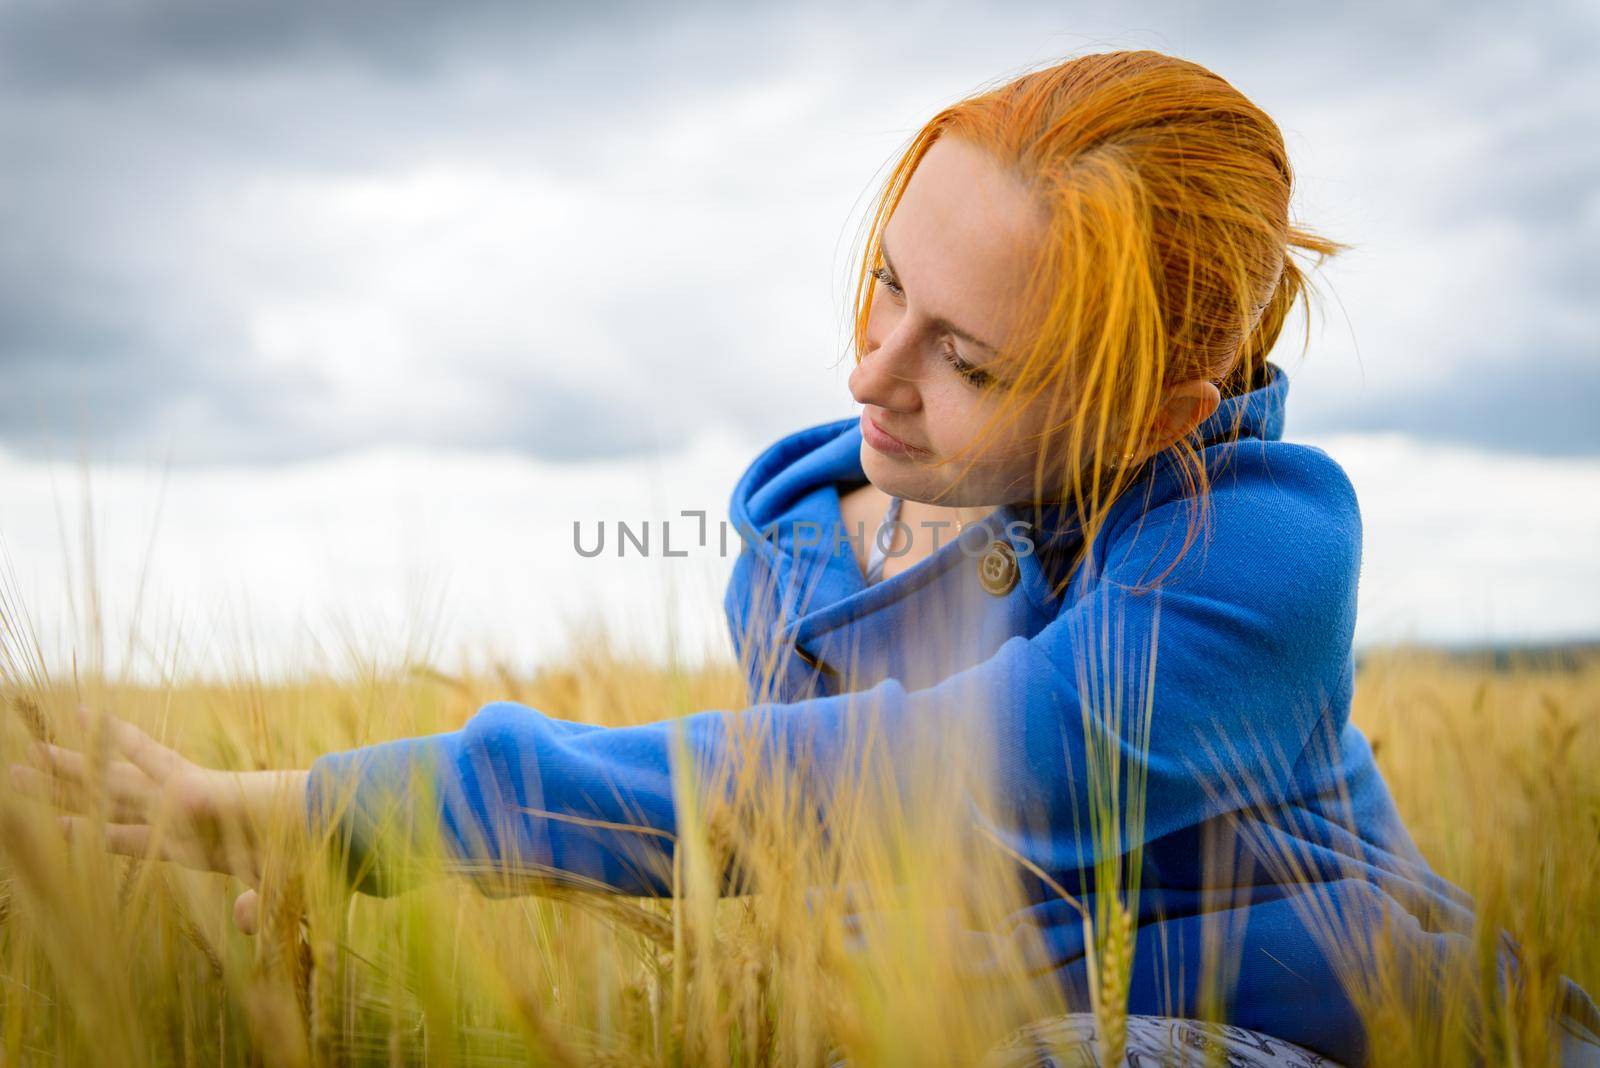 Young woman wearing blue sweater in wheat field on a cloudy day